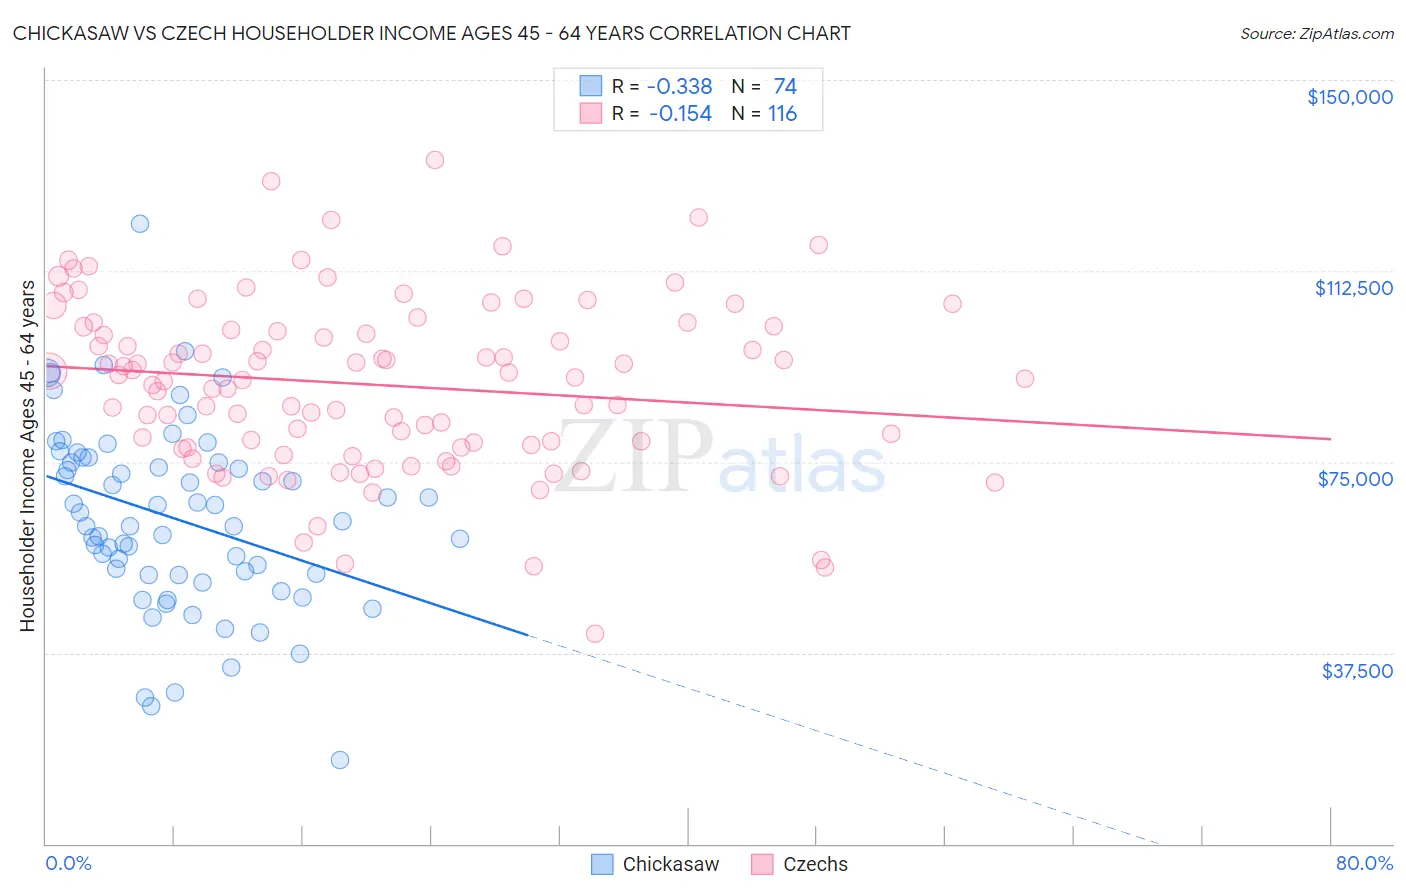 Chickasaw vs Czech Householder Income Ages 45 - 64 years